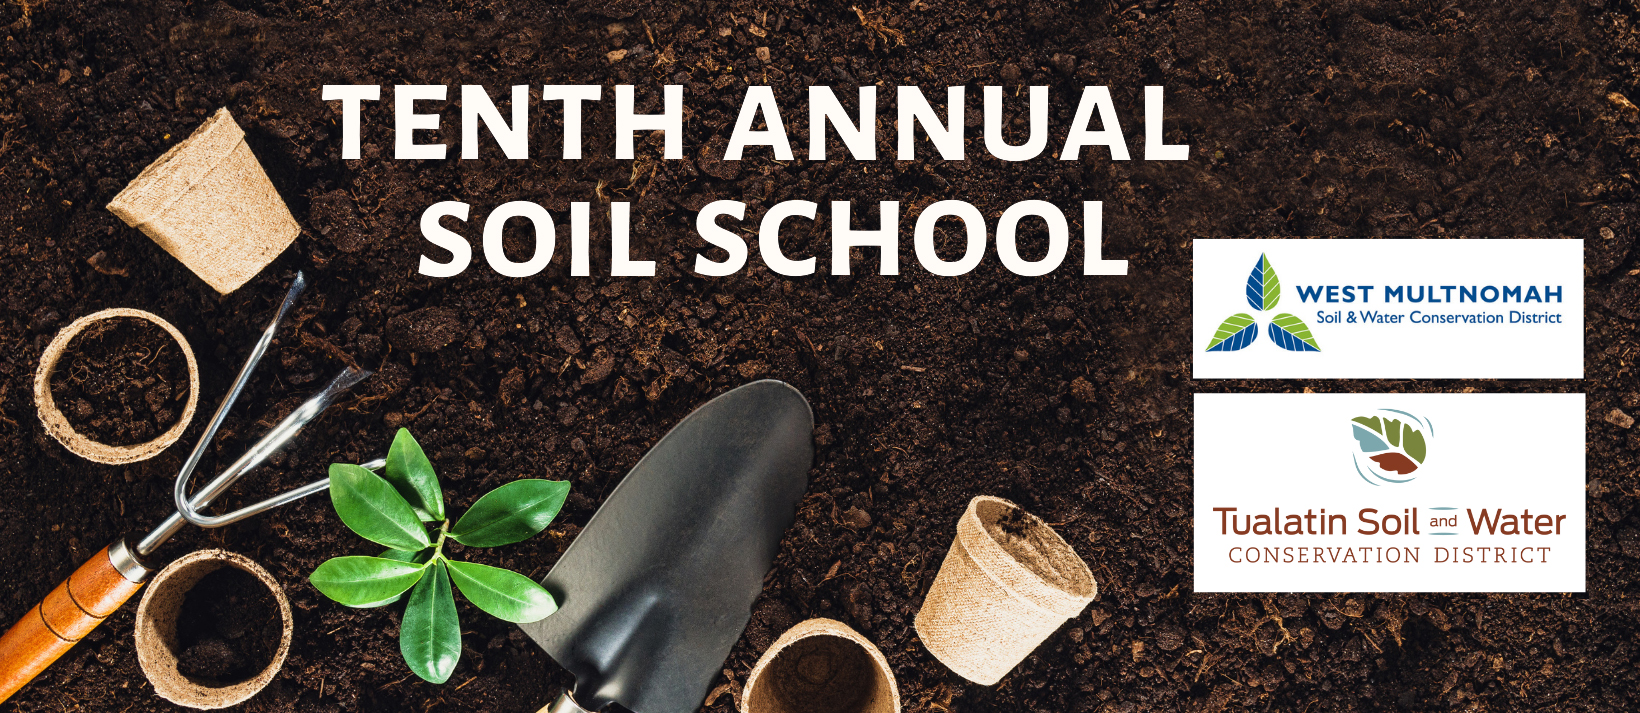 Two logos and Tenth Annual Soil School is above garden tools and a green plant with dark soil background